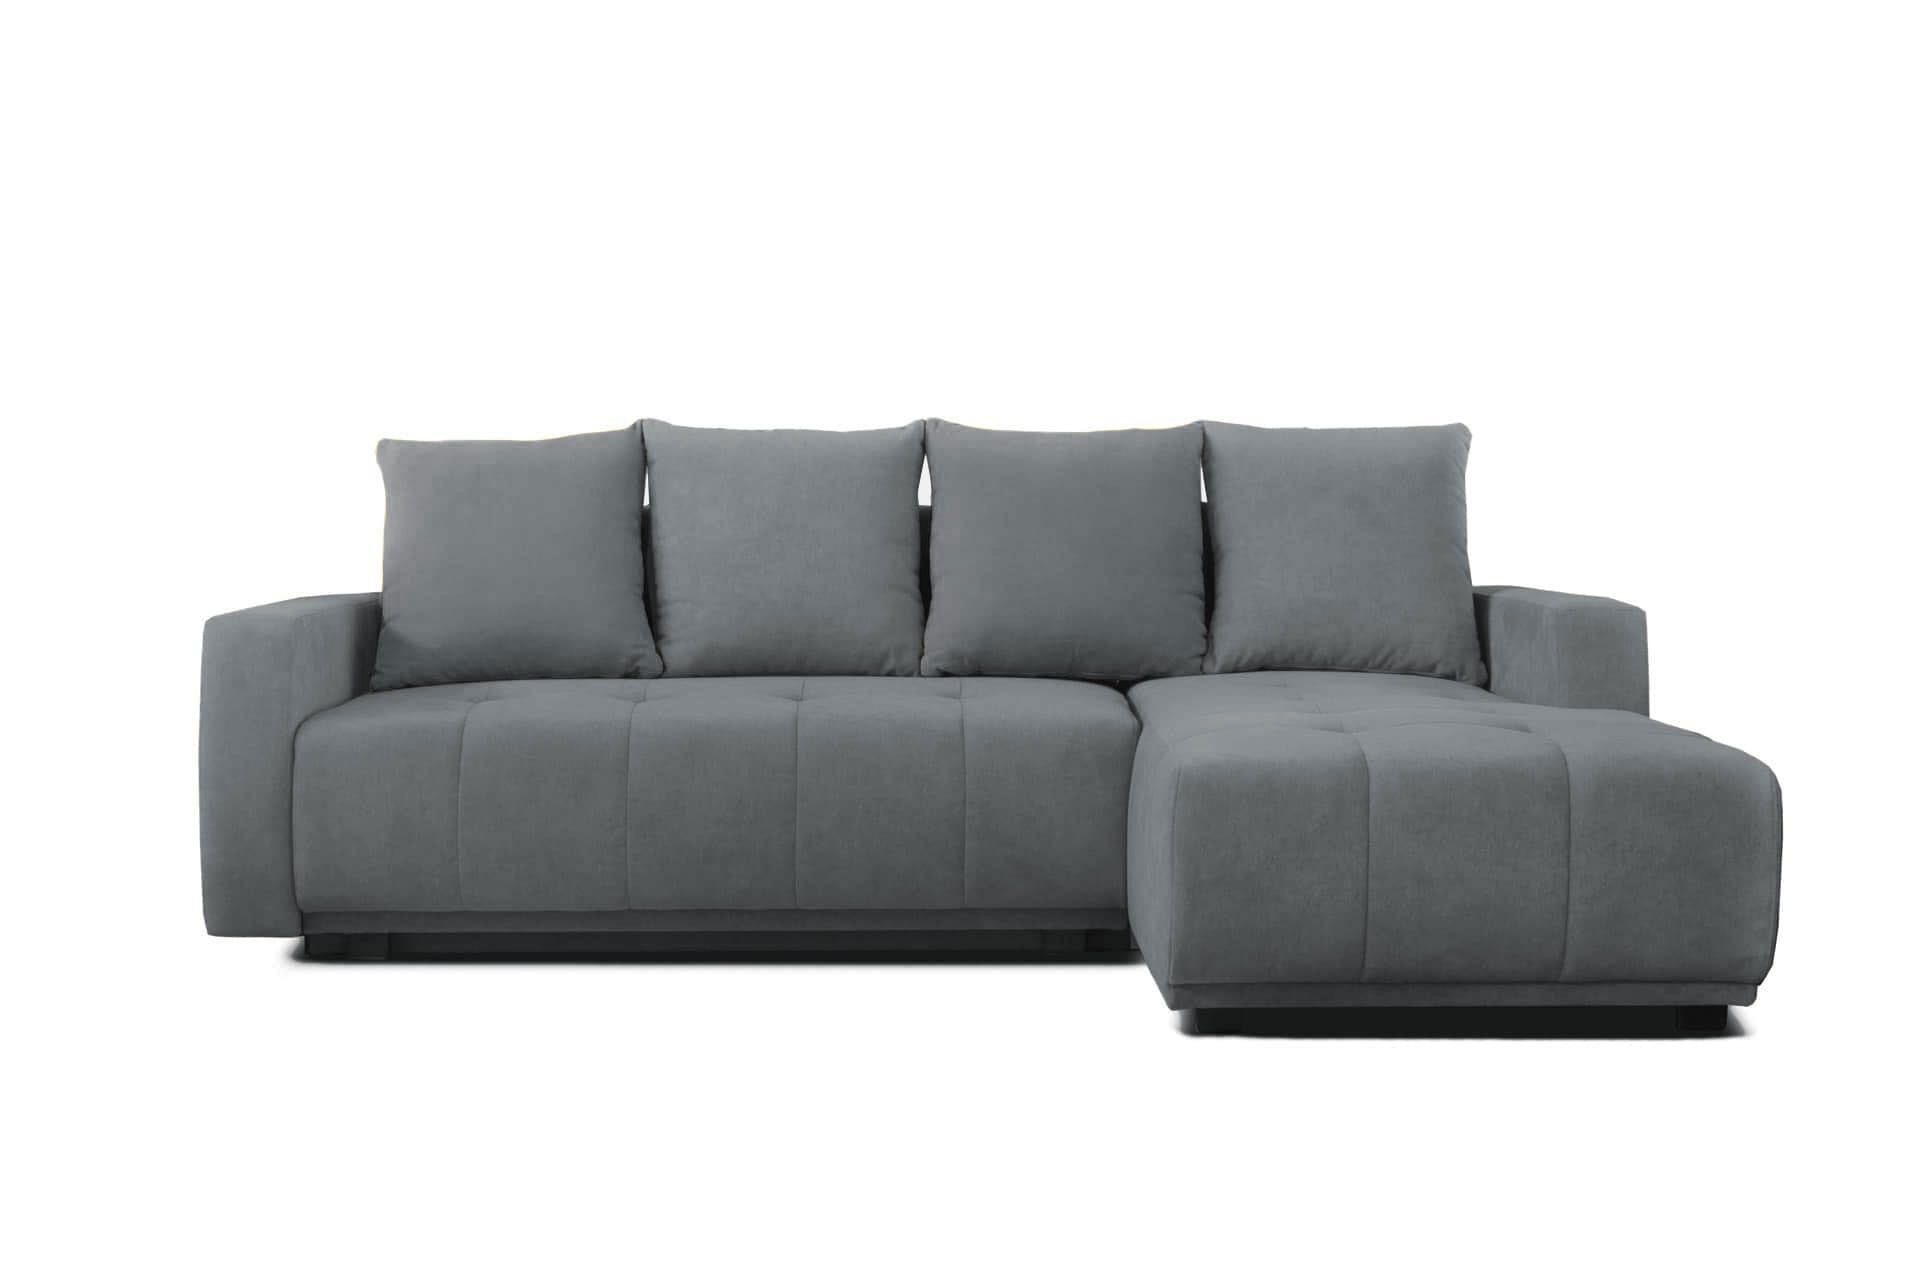 Indy Sectional Sofa Sleeper Queen Size